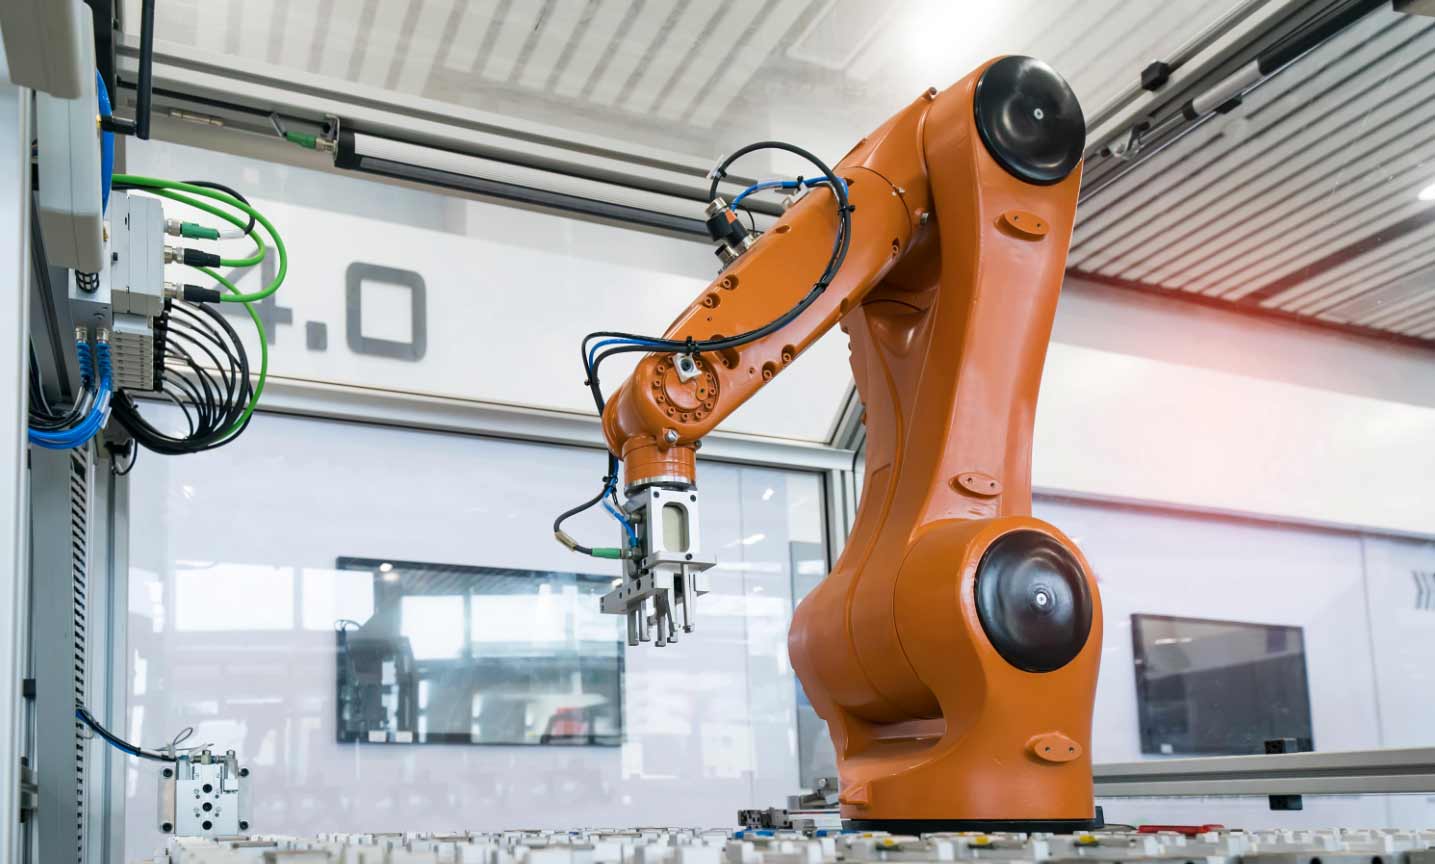 A Swedish-based industrial robot accessories company is set to set up an India subsidiary